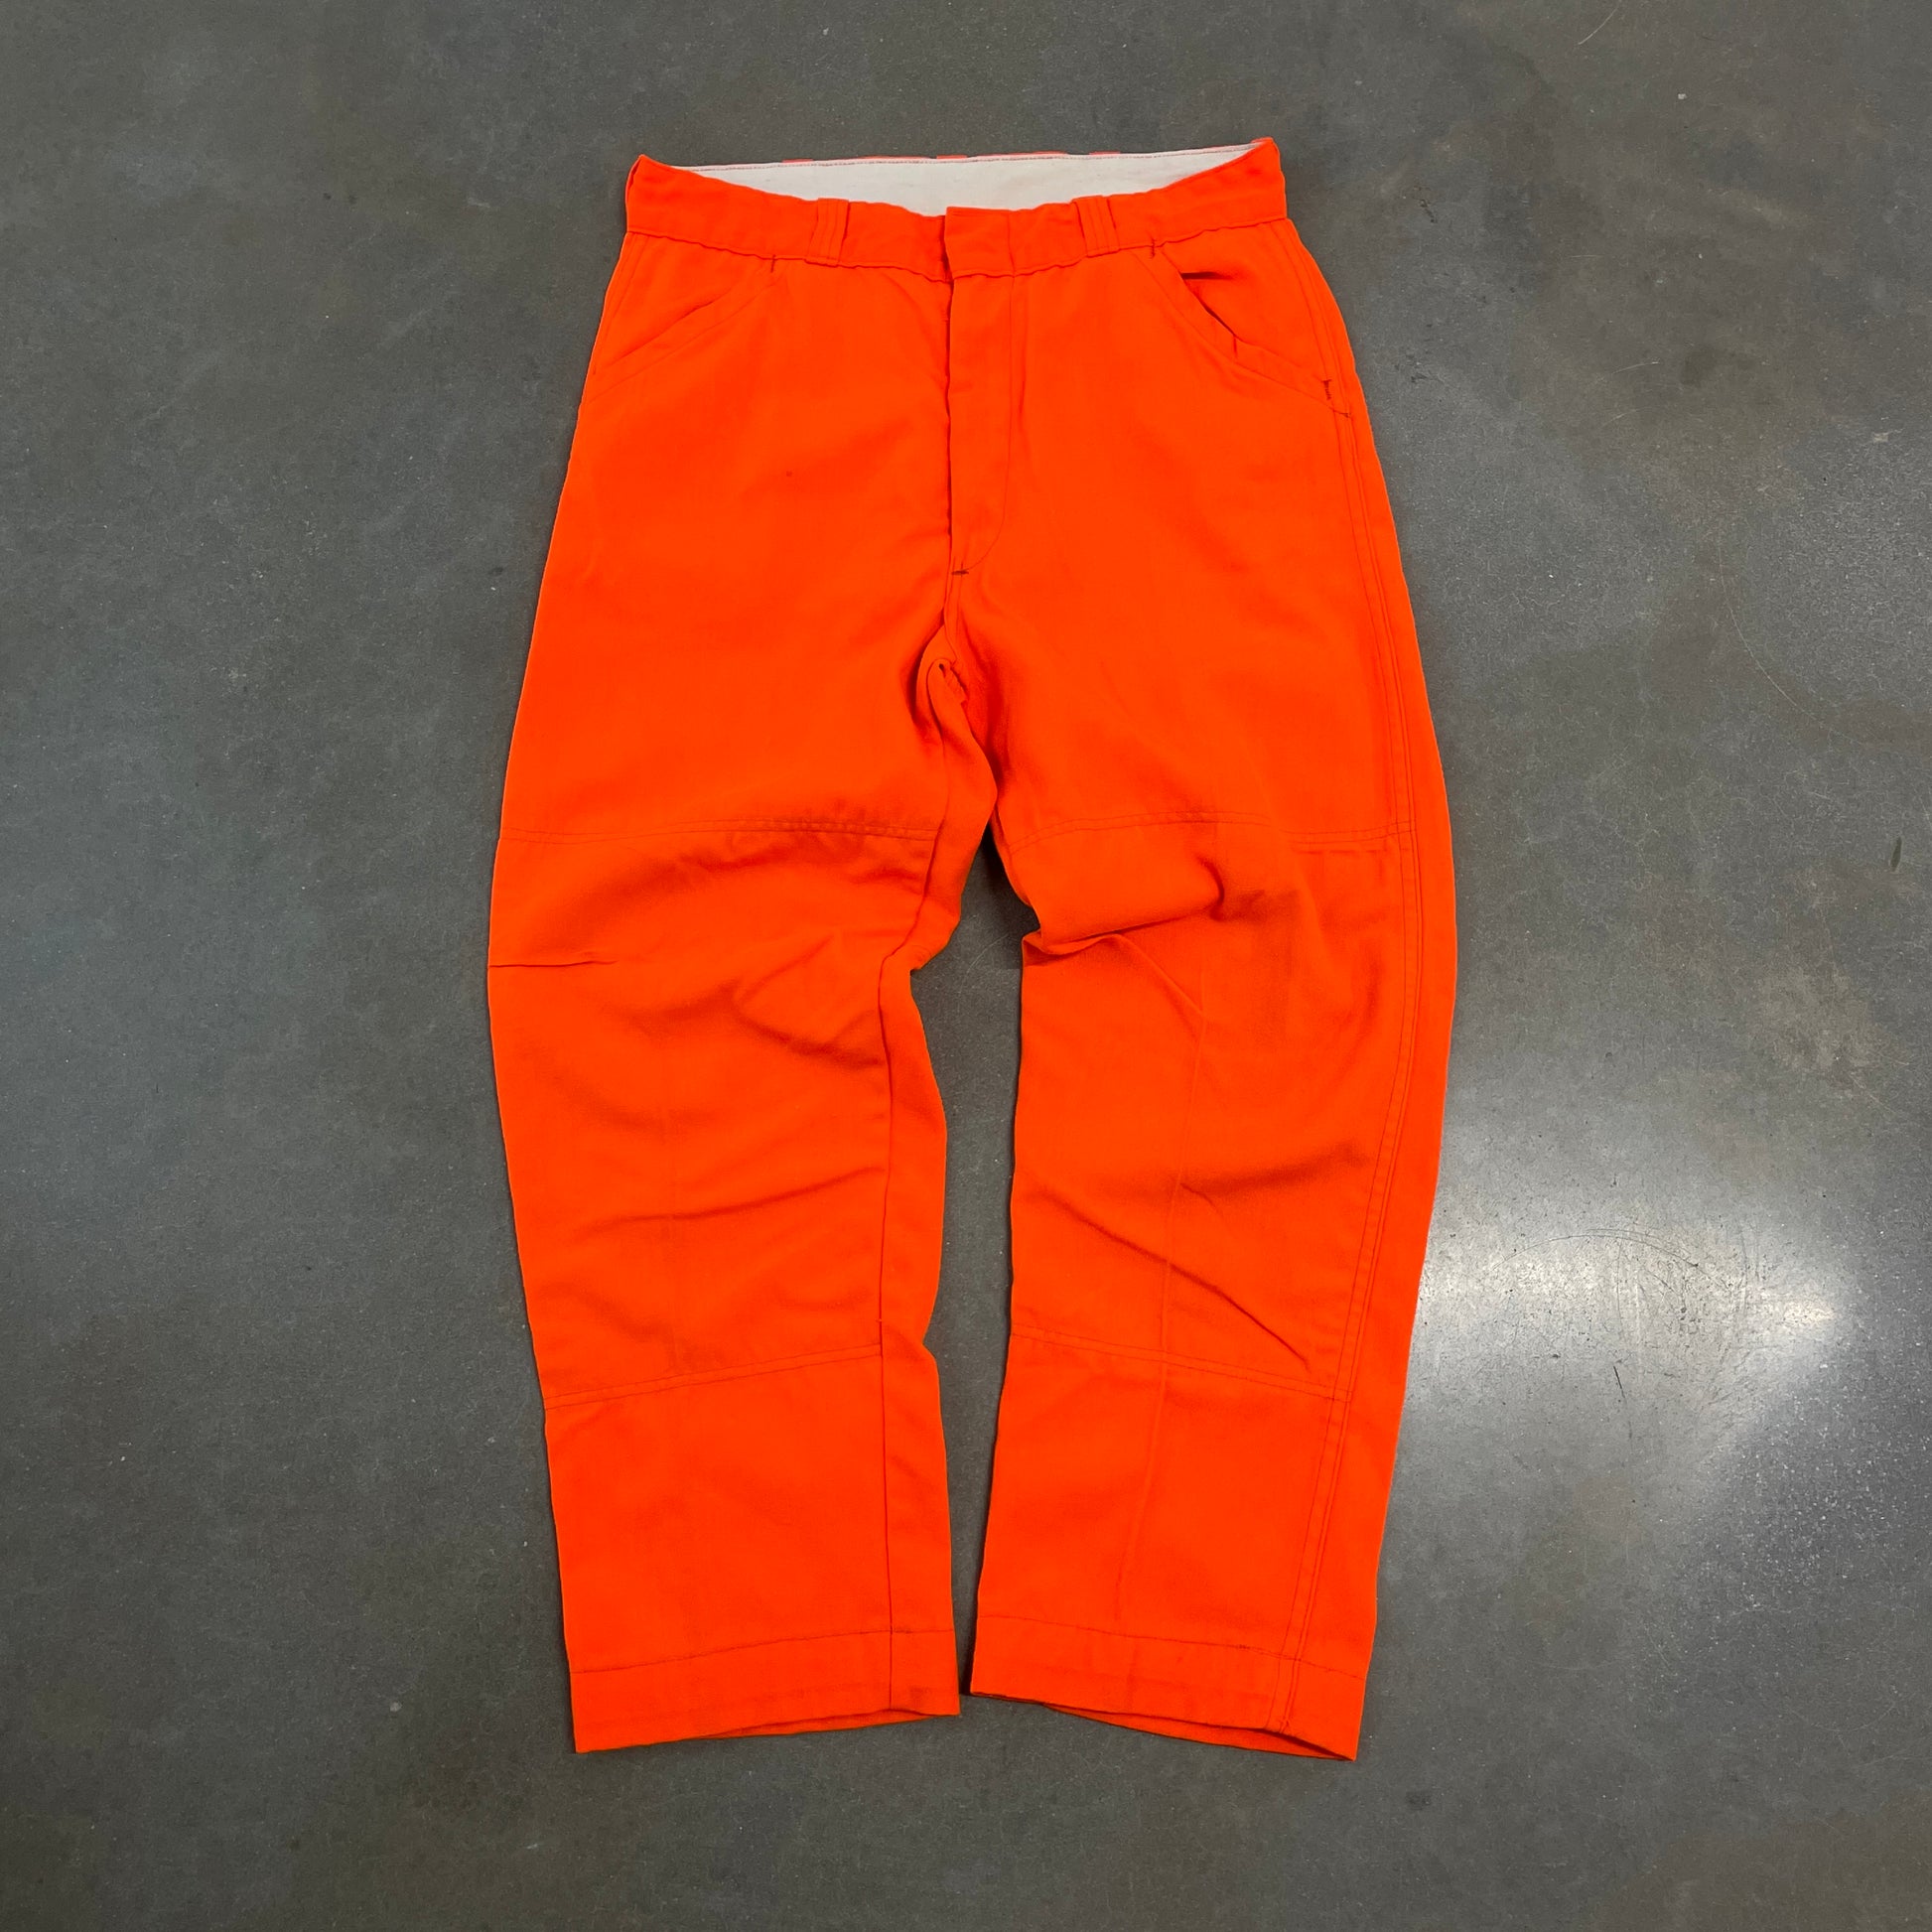 Online Vintage Store, 80's Orange Tapered Trousers